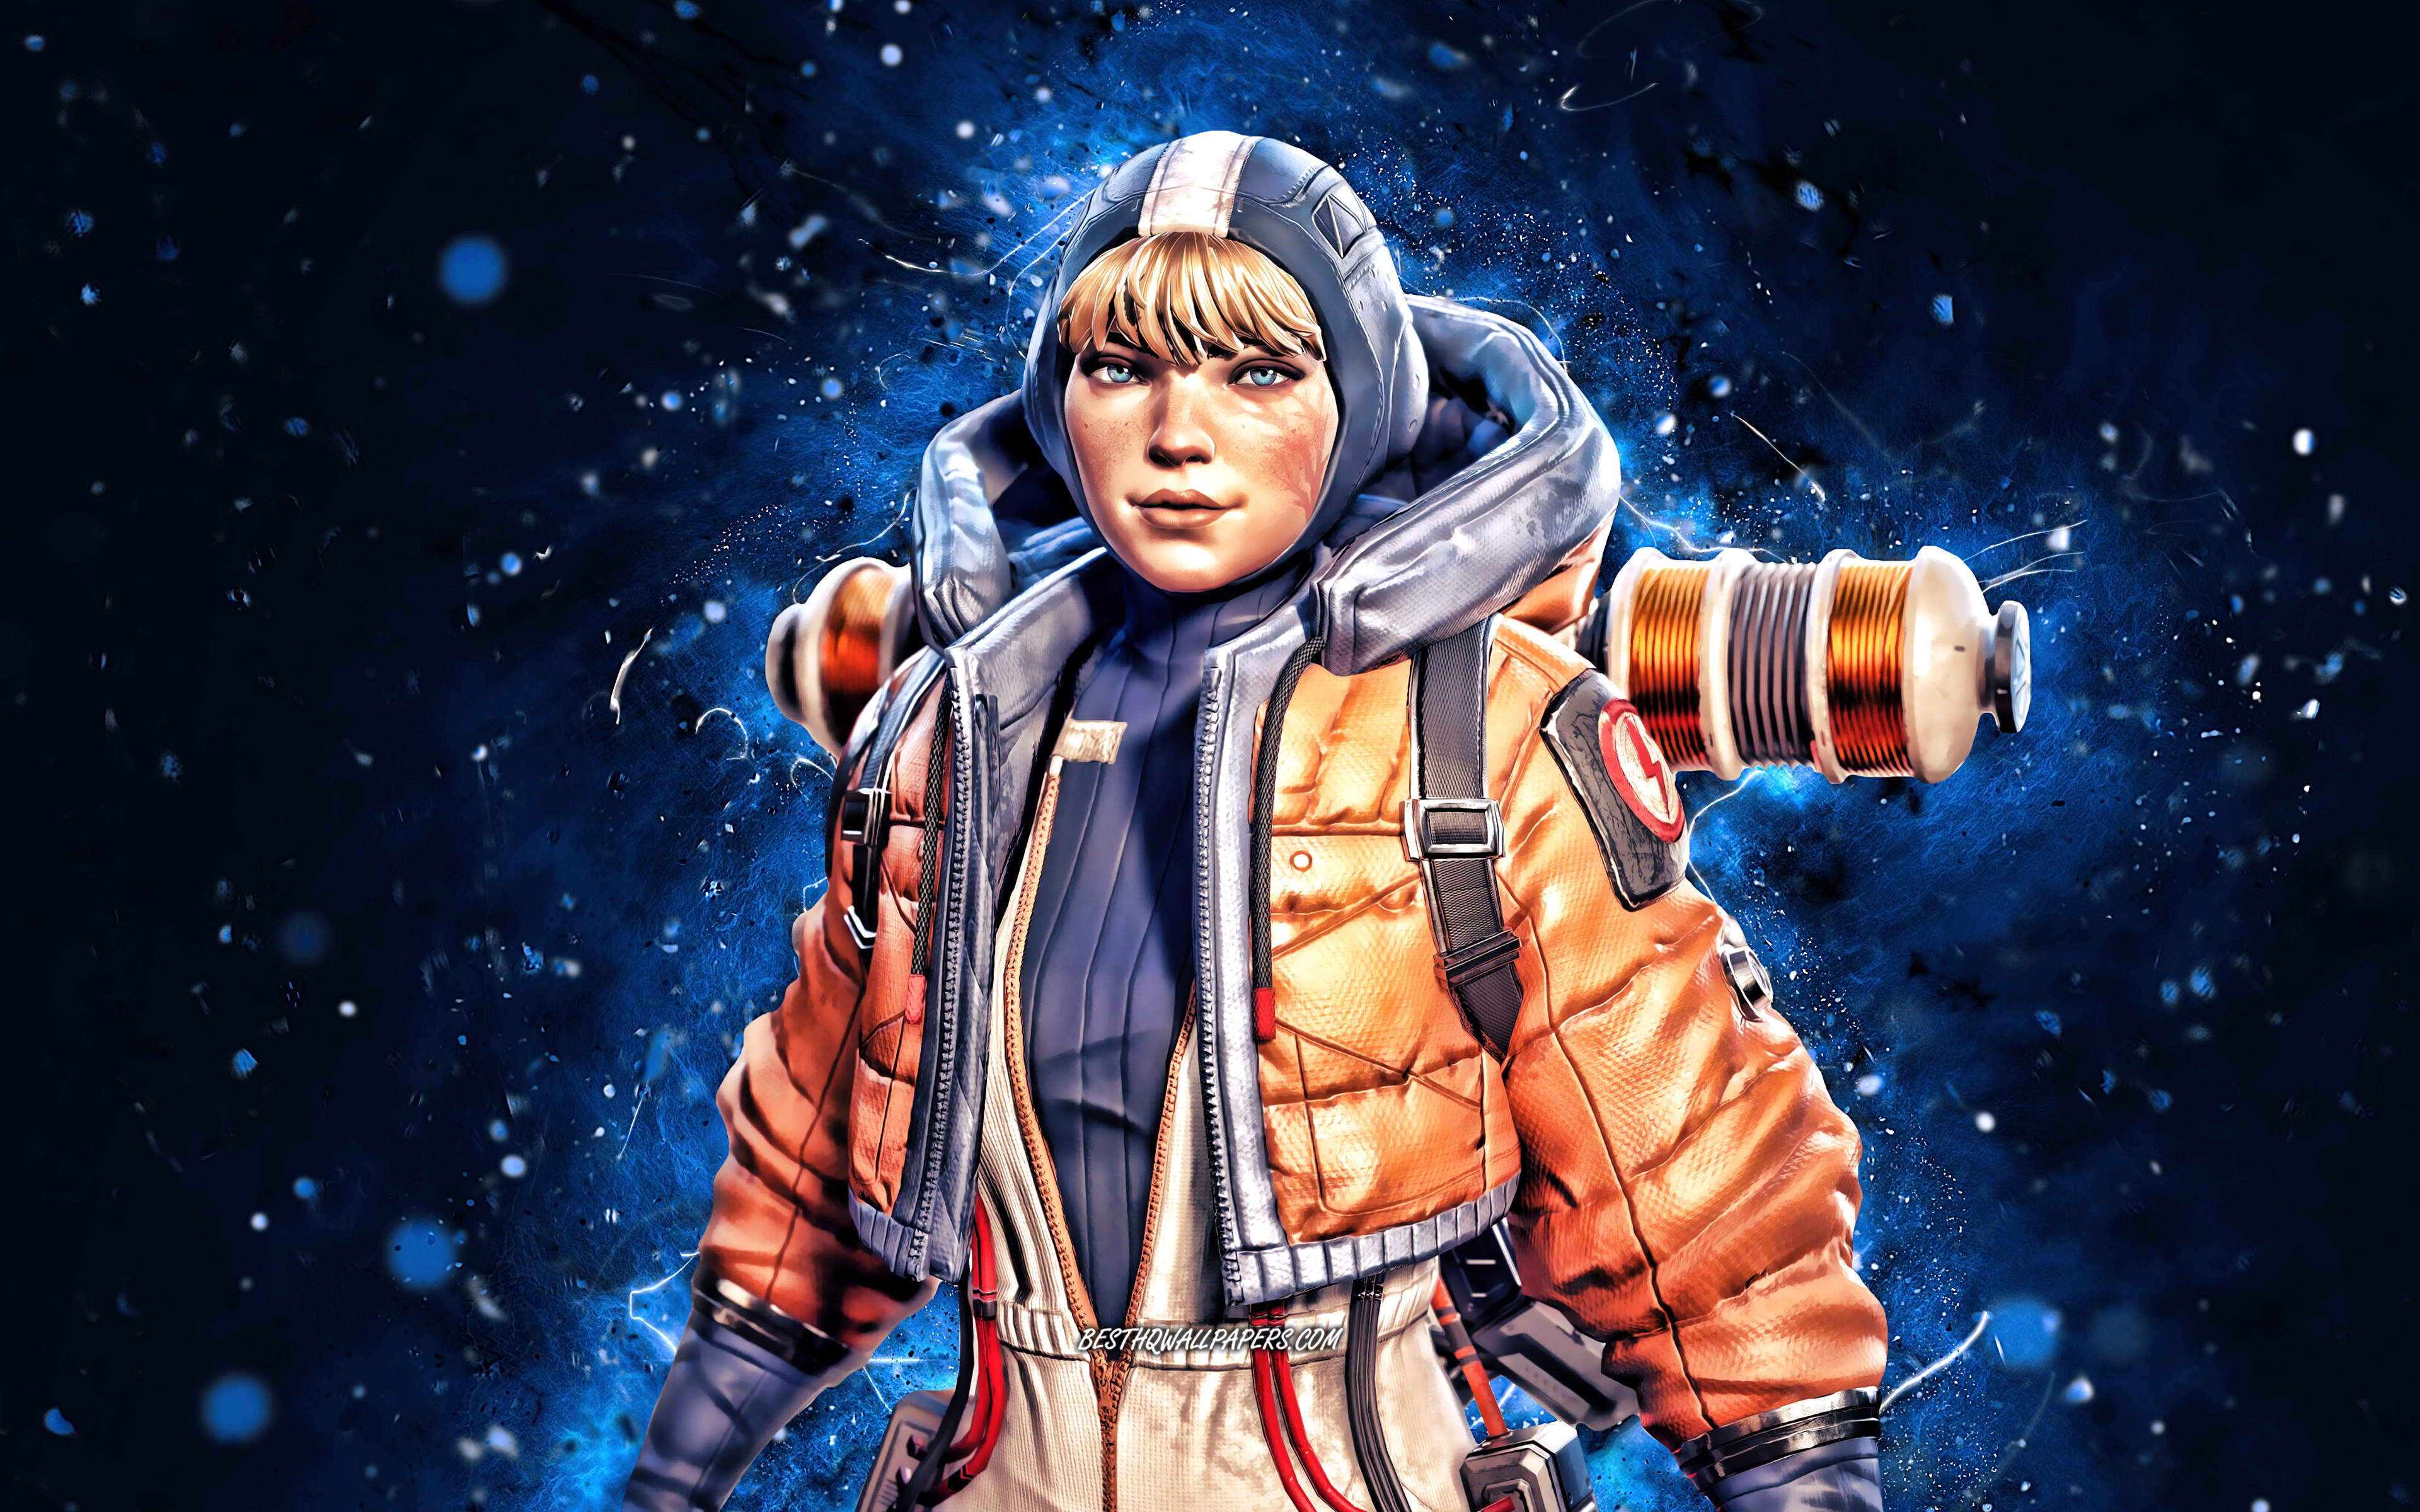 Download wallpaper Wattson, 4k, blue neon lights, Apex Legends, Static Defender, Apex Legends characters, Wattson Skin, Wattson Apex Legends for desktop with resolution 3840x2400. High Quality HD picture wallpaper